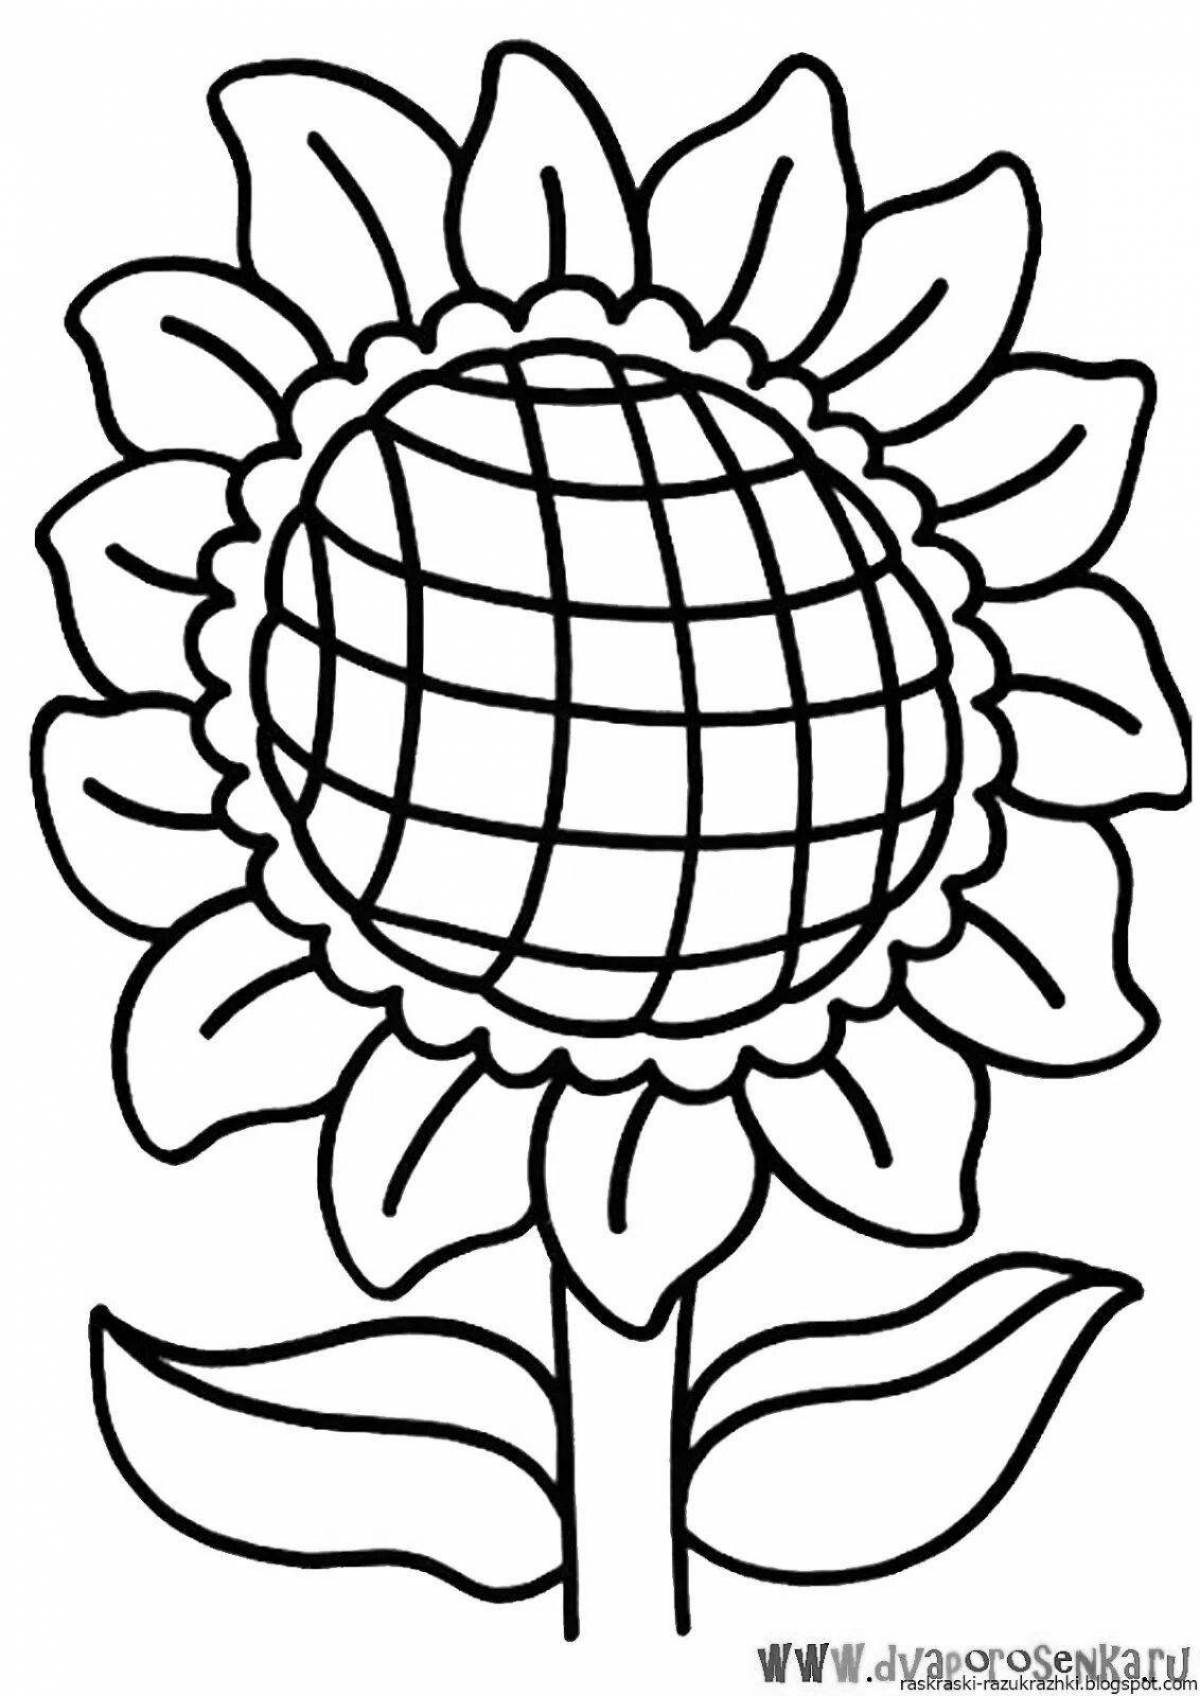 Impressive sunflower coloring book for preschoolers 2-3 years old